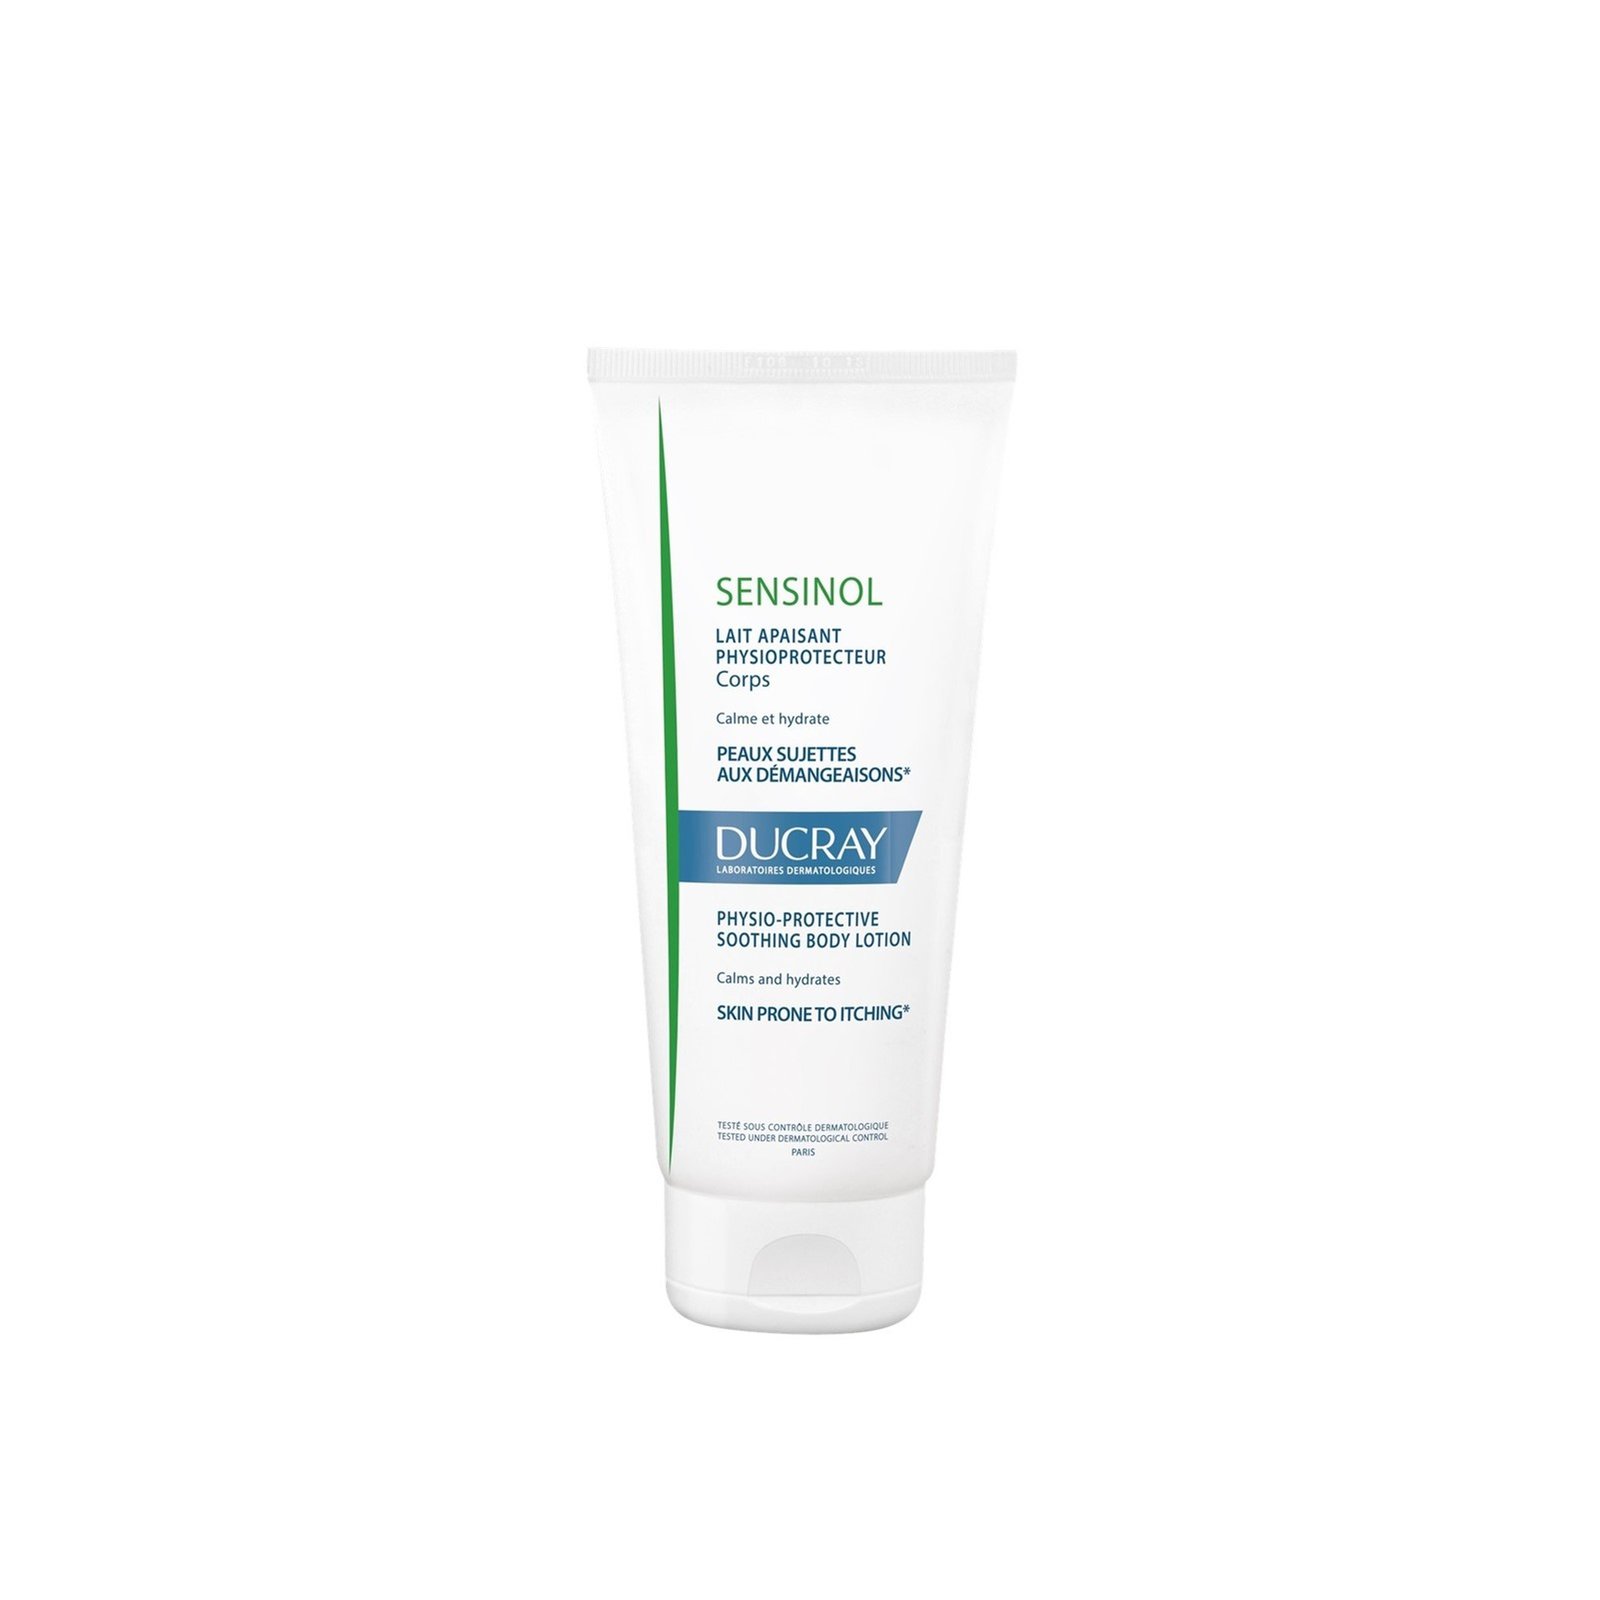 Ducray Sensinol Physio-Protective Soothing Body Lotion 200ml